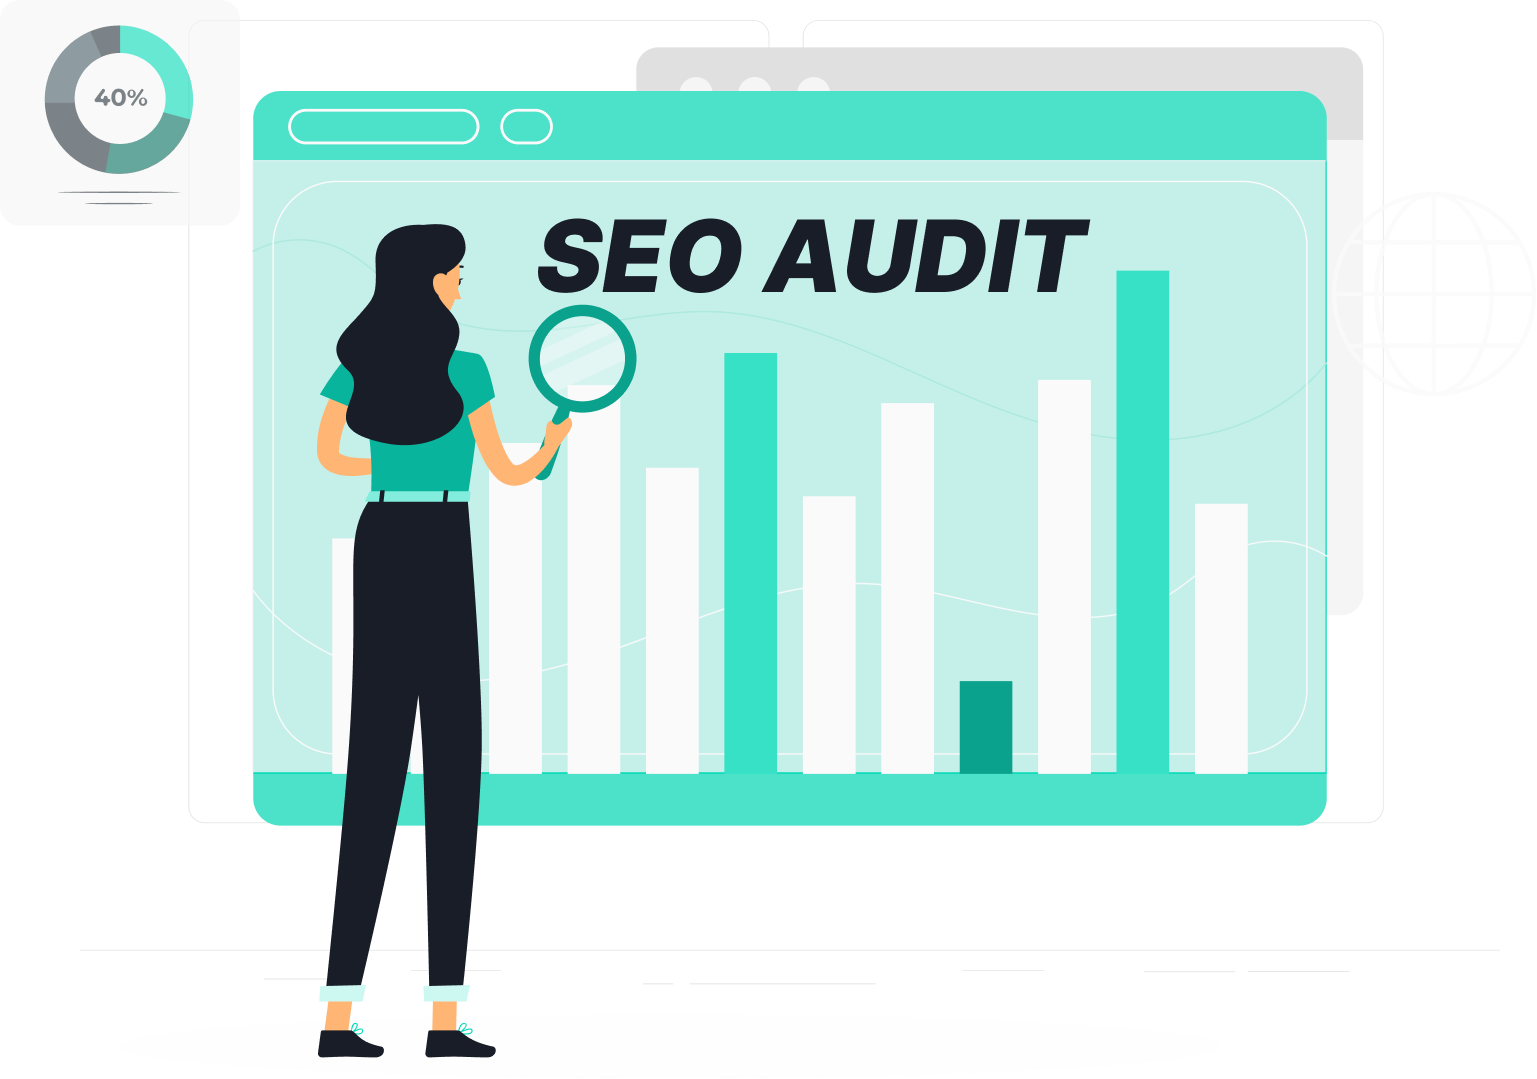 The Complete Technical SEO Audit Checklist For SaaS: From Tech SEO Experts